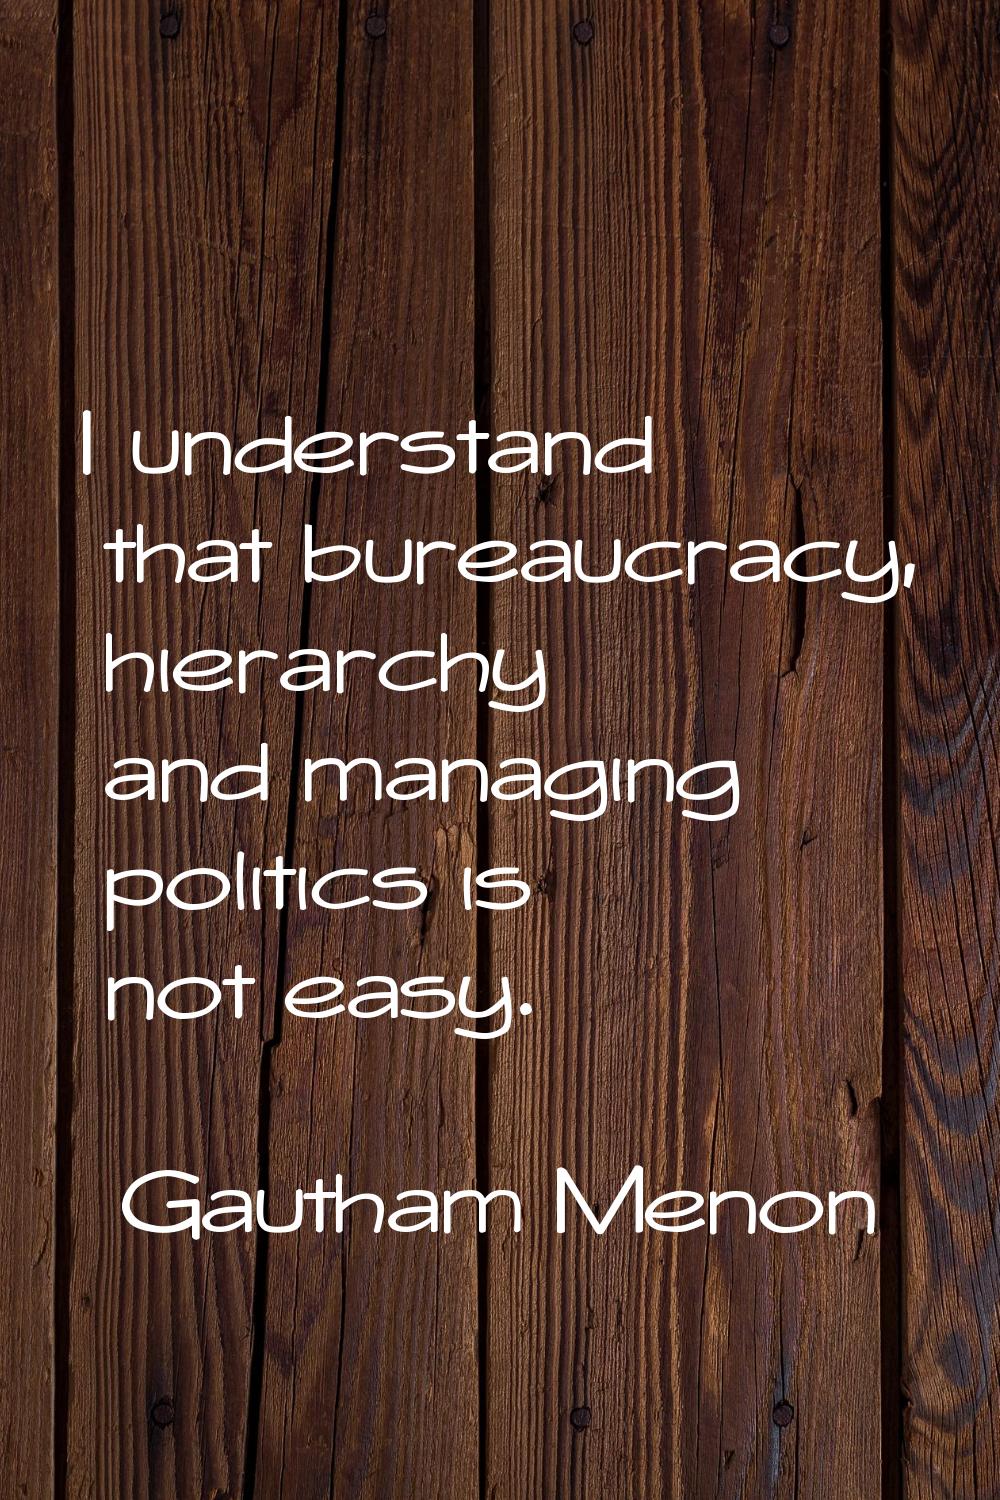 I understand that bureaucracy, hierarchy and managing politics is not easy.